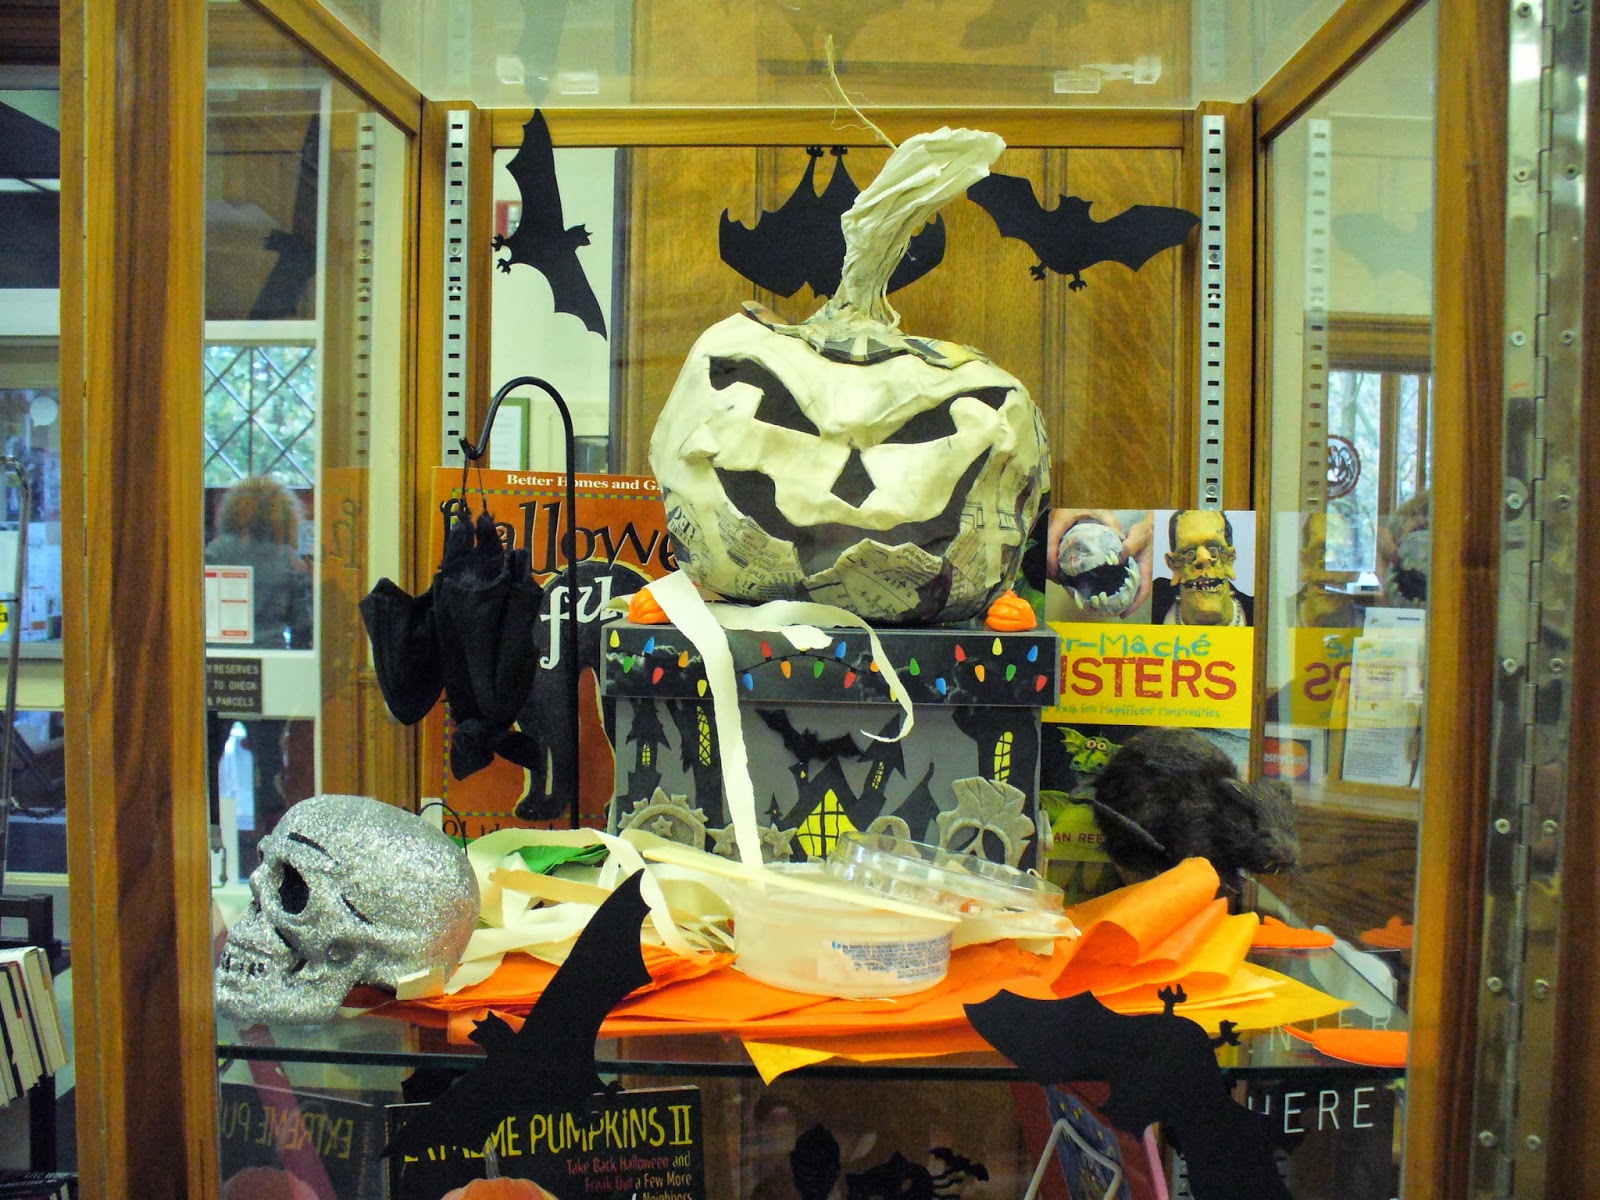 Library Displays: Get ready for Halloween